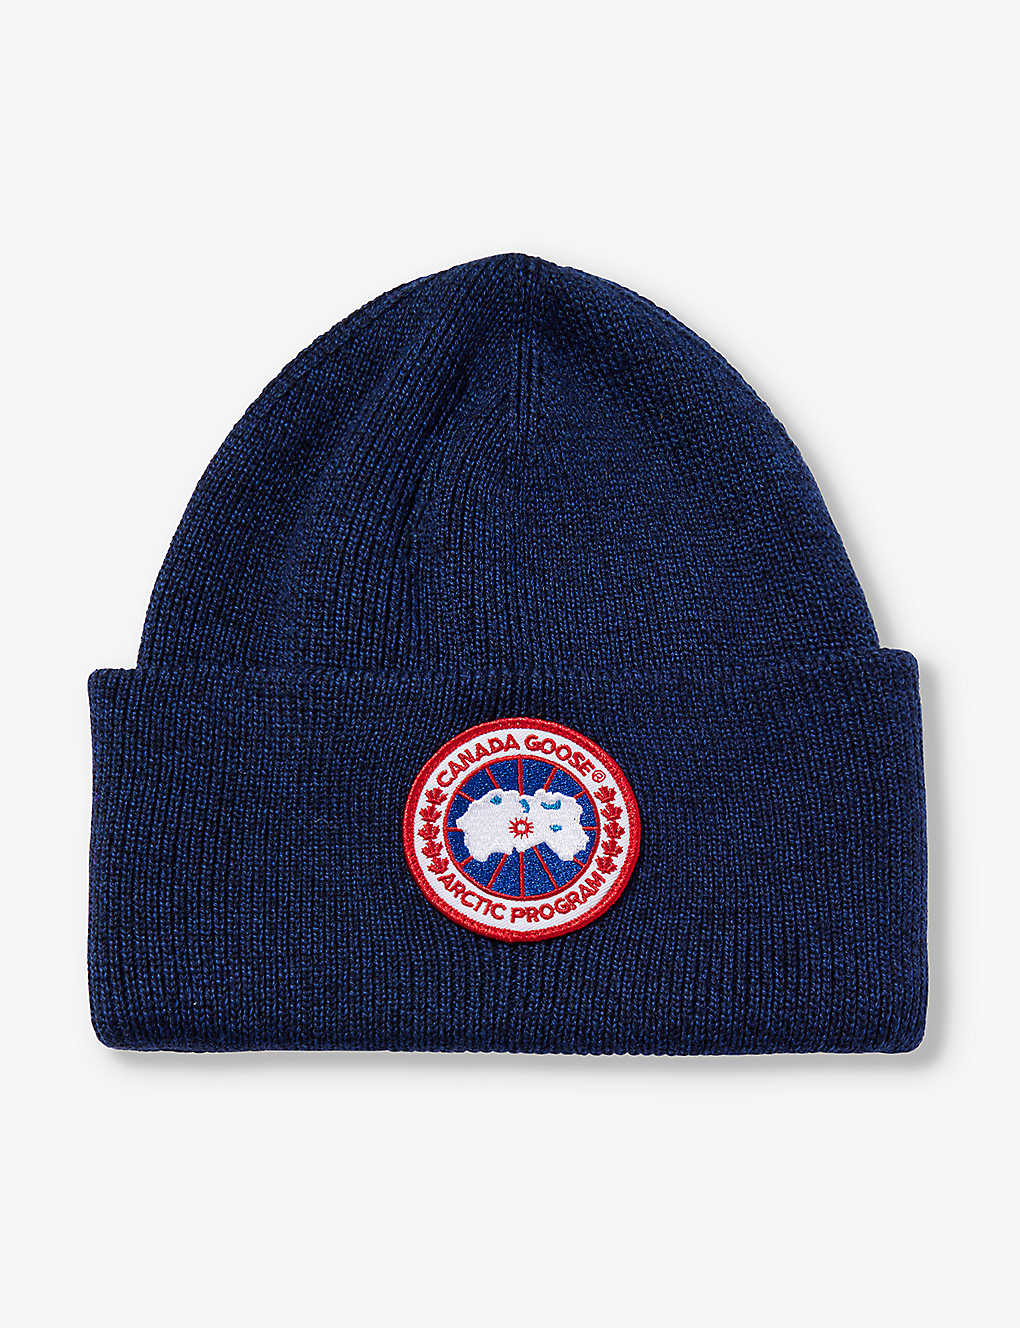 Shop Canada Goose Men's Navy Heather Arctic Disc Ribbed Wool Beanie Hat